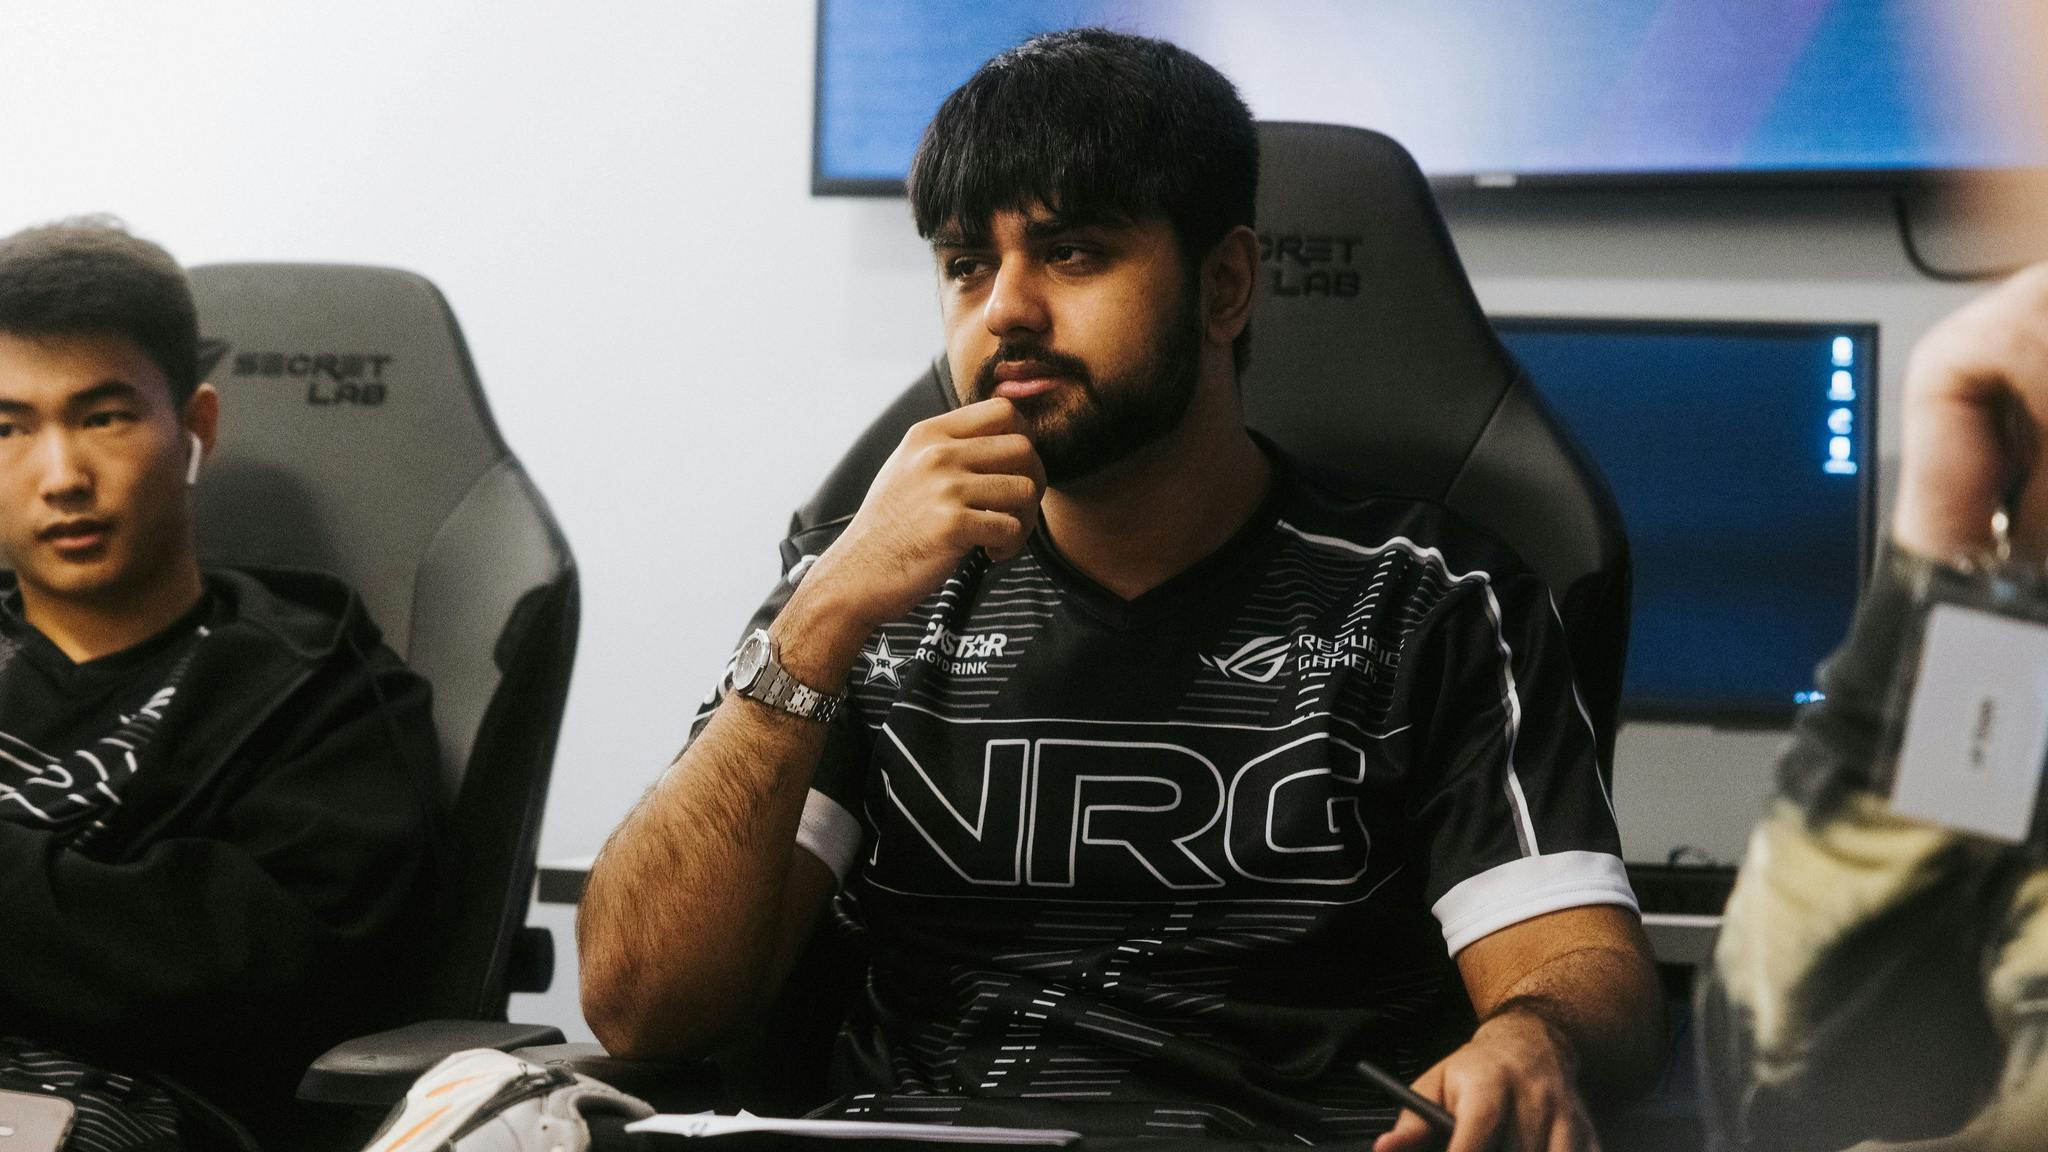 "There are so many issues where we know what to do, but we don't do it. We're making basic fundamental mistakes, and it's costing us games." - Chet on NRG's performance